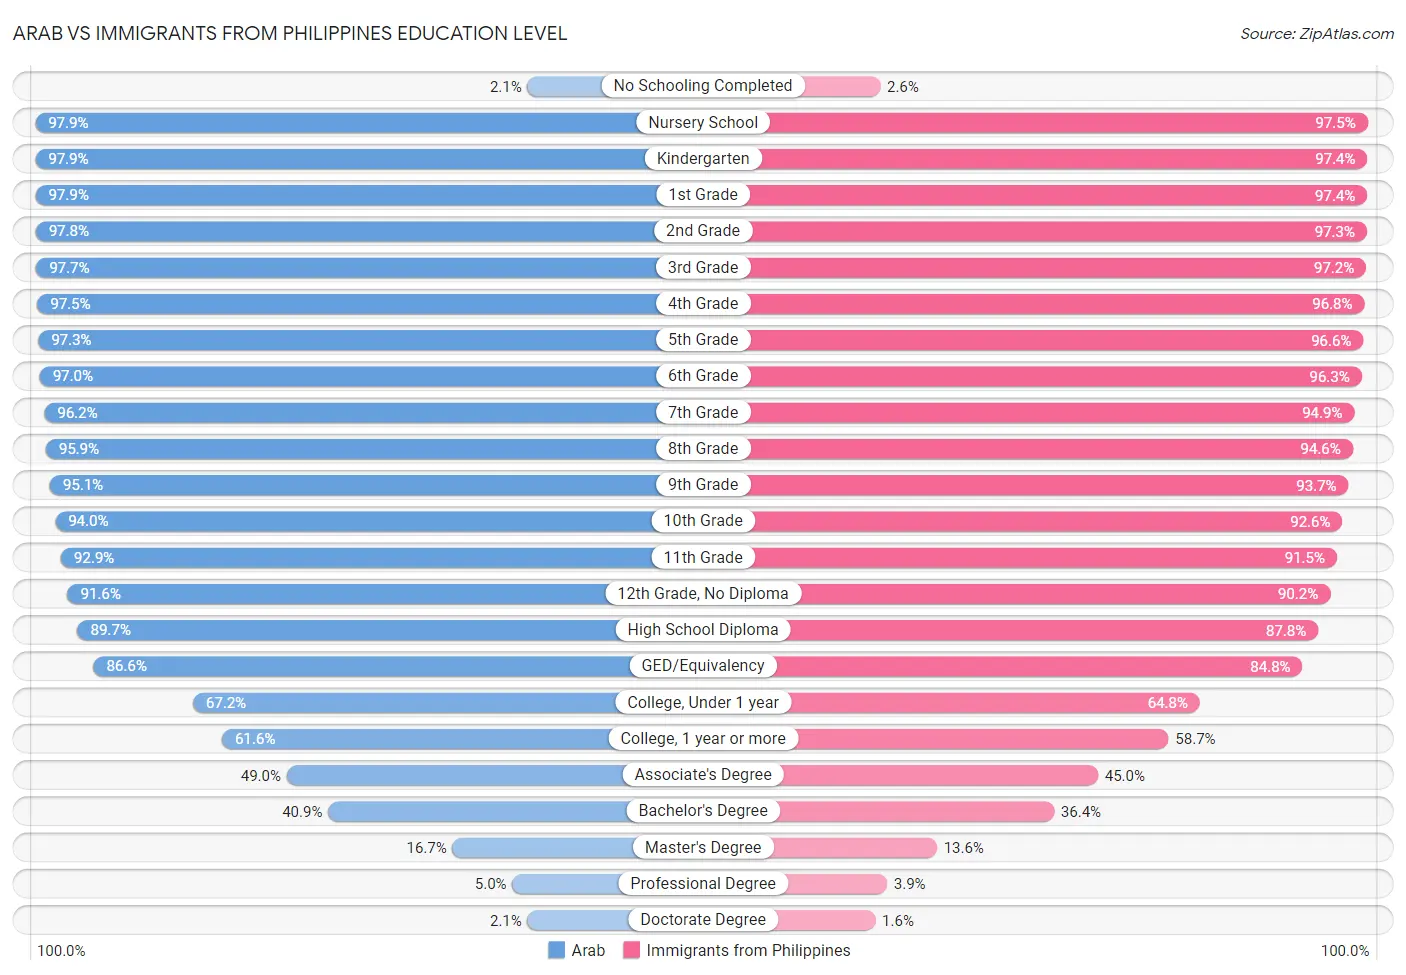 Arab vs Immigrants from Philippines Education Level